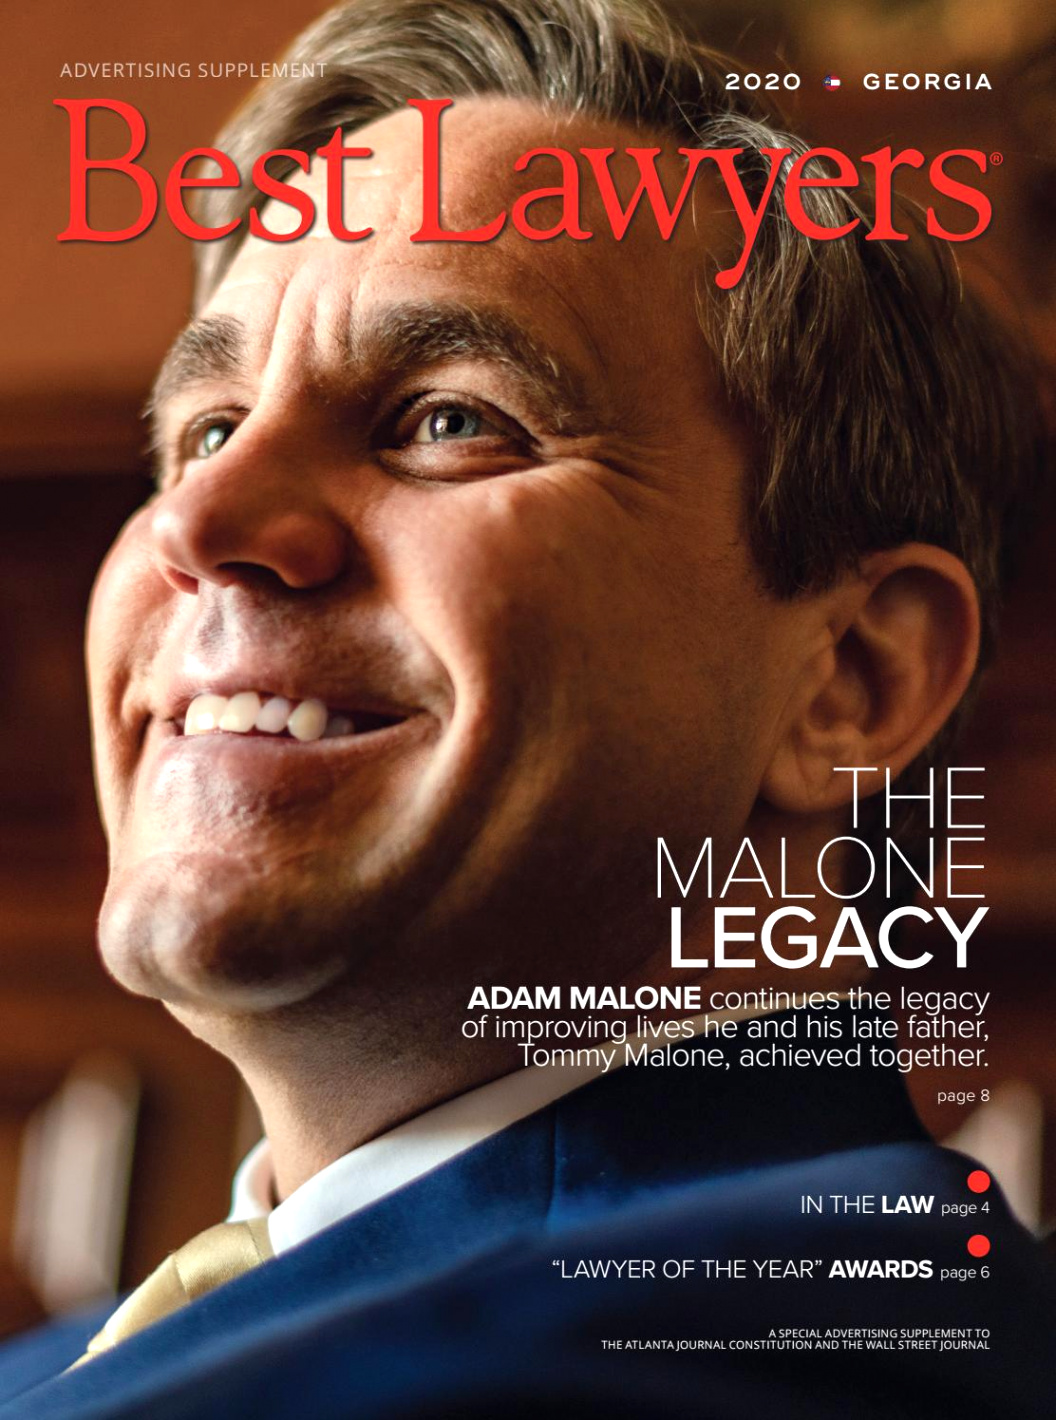 Personil Injury Lawyer In Moultrie Il Dans Best Lawyers In Georgia 2020 by Best Lawyers - issuu